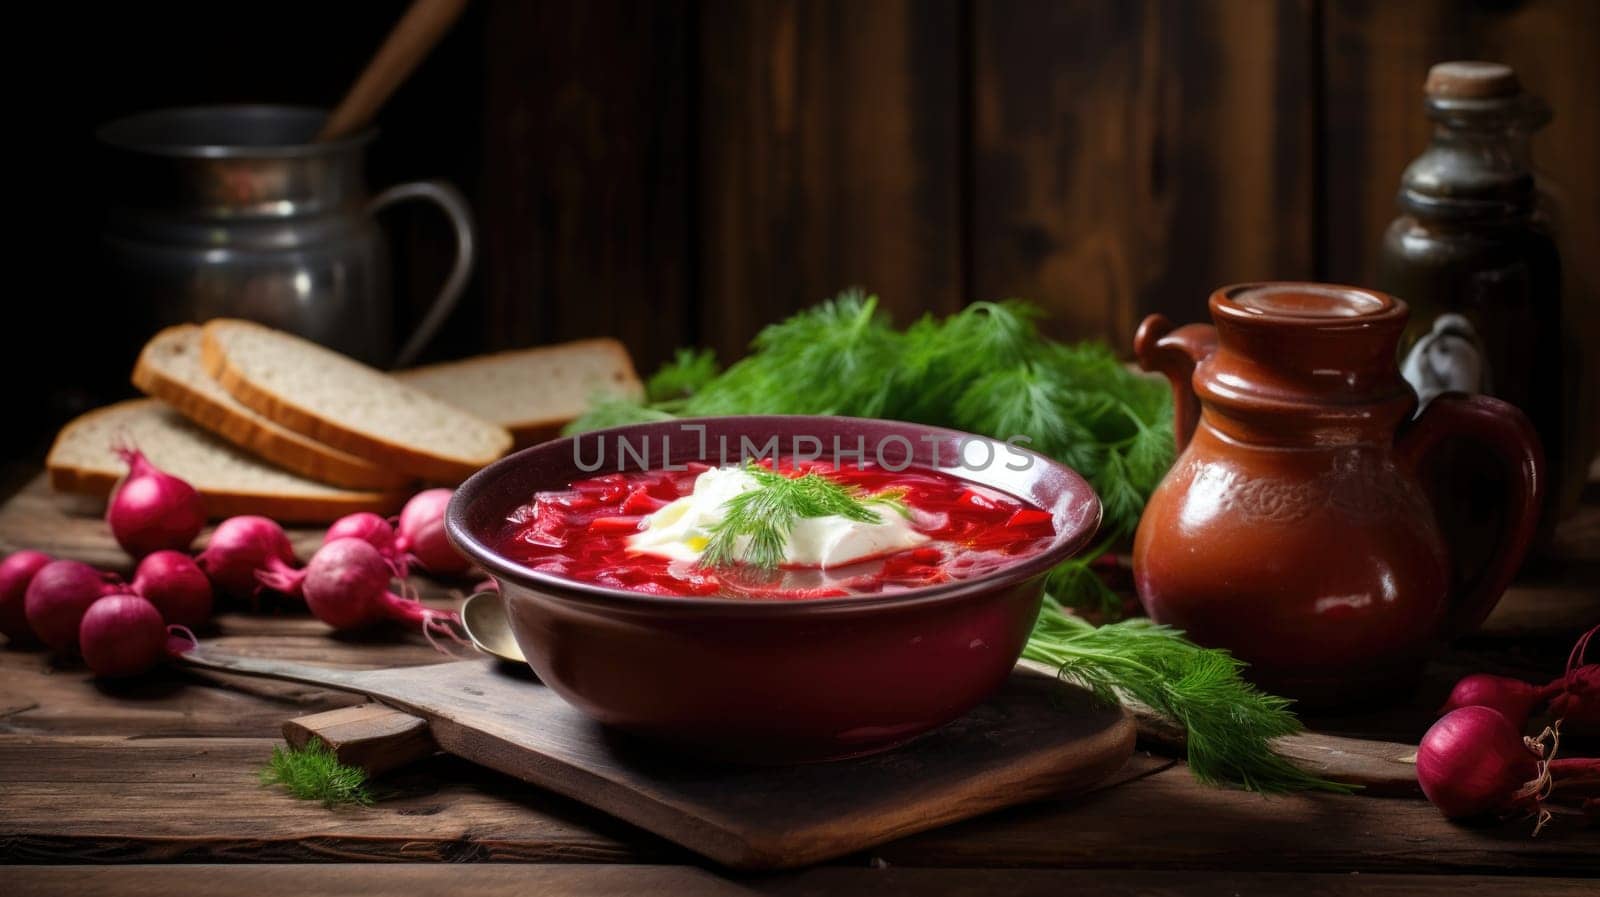 A bowl of borscht, a traditional Eastern European soup, garnished with sour cream and slices of radishes.